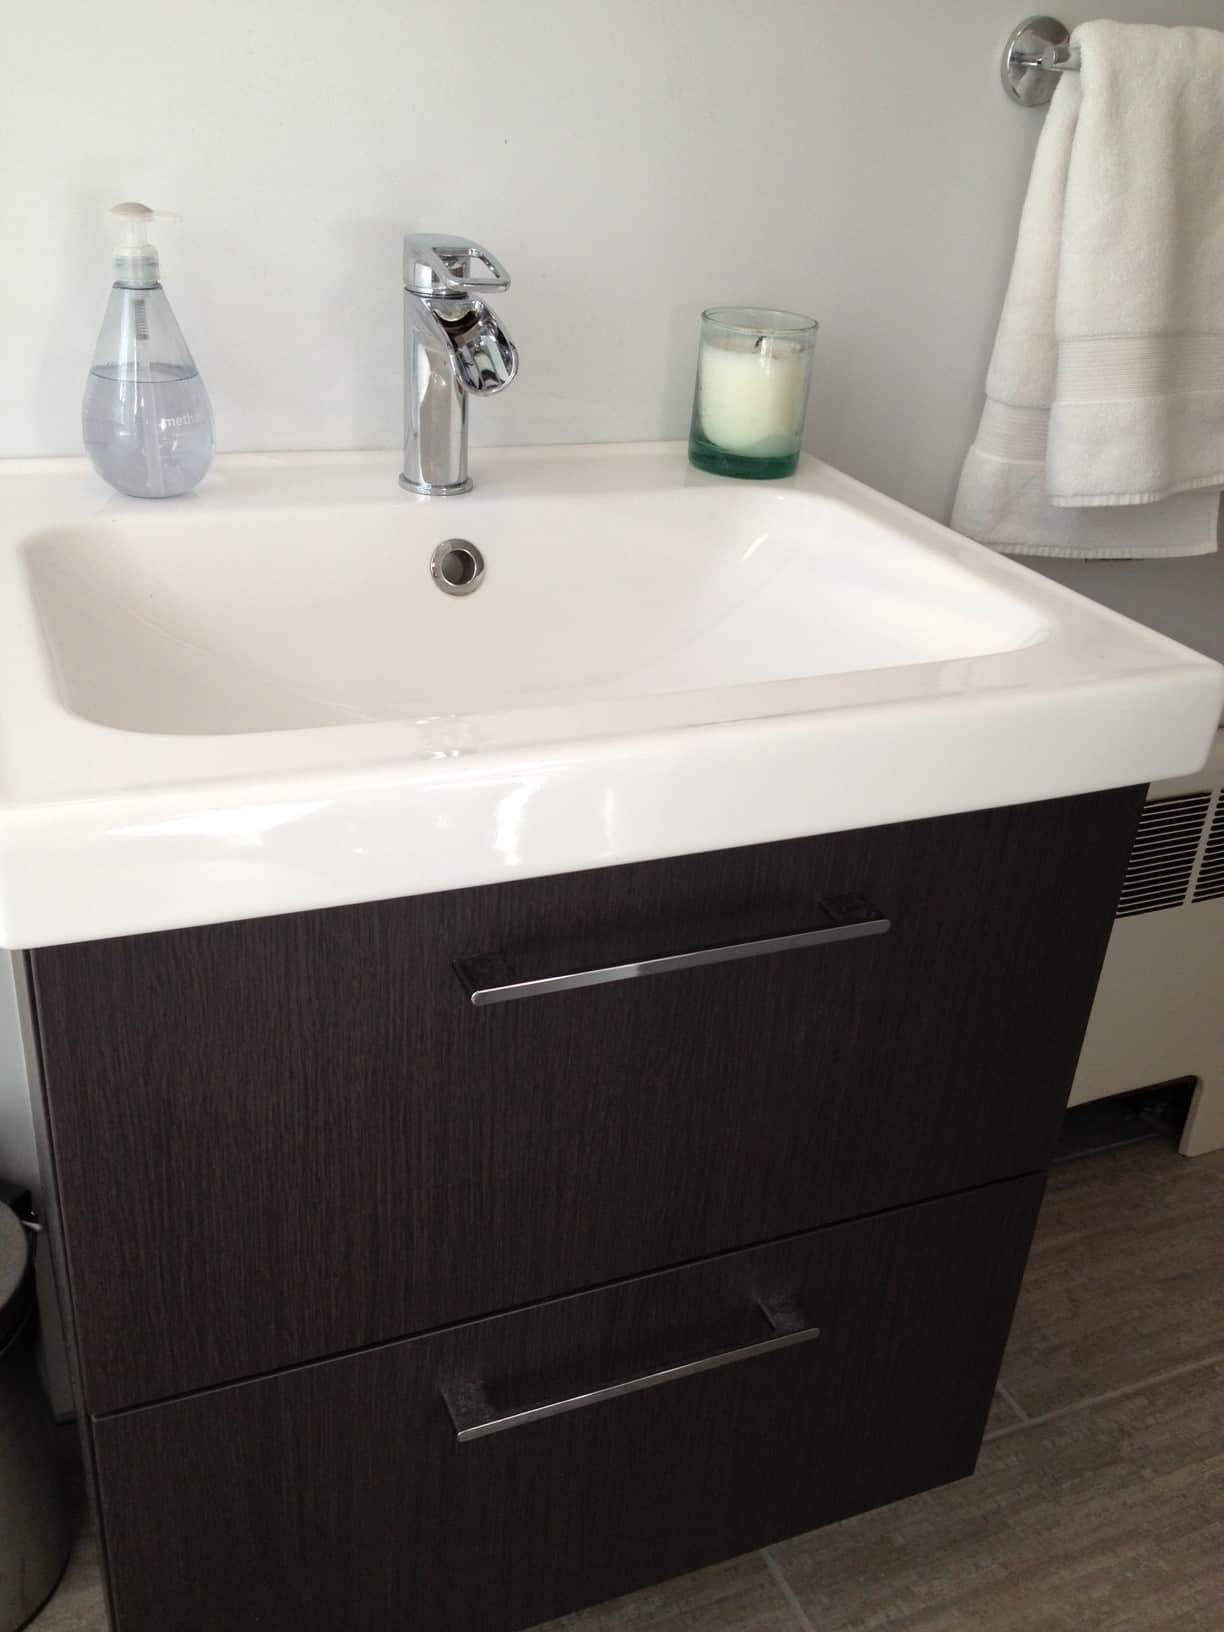 A new bathroom sink with a dark cabinet and silver faucet